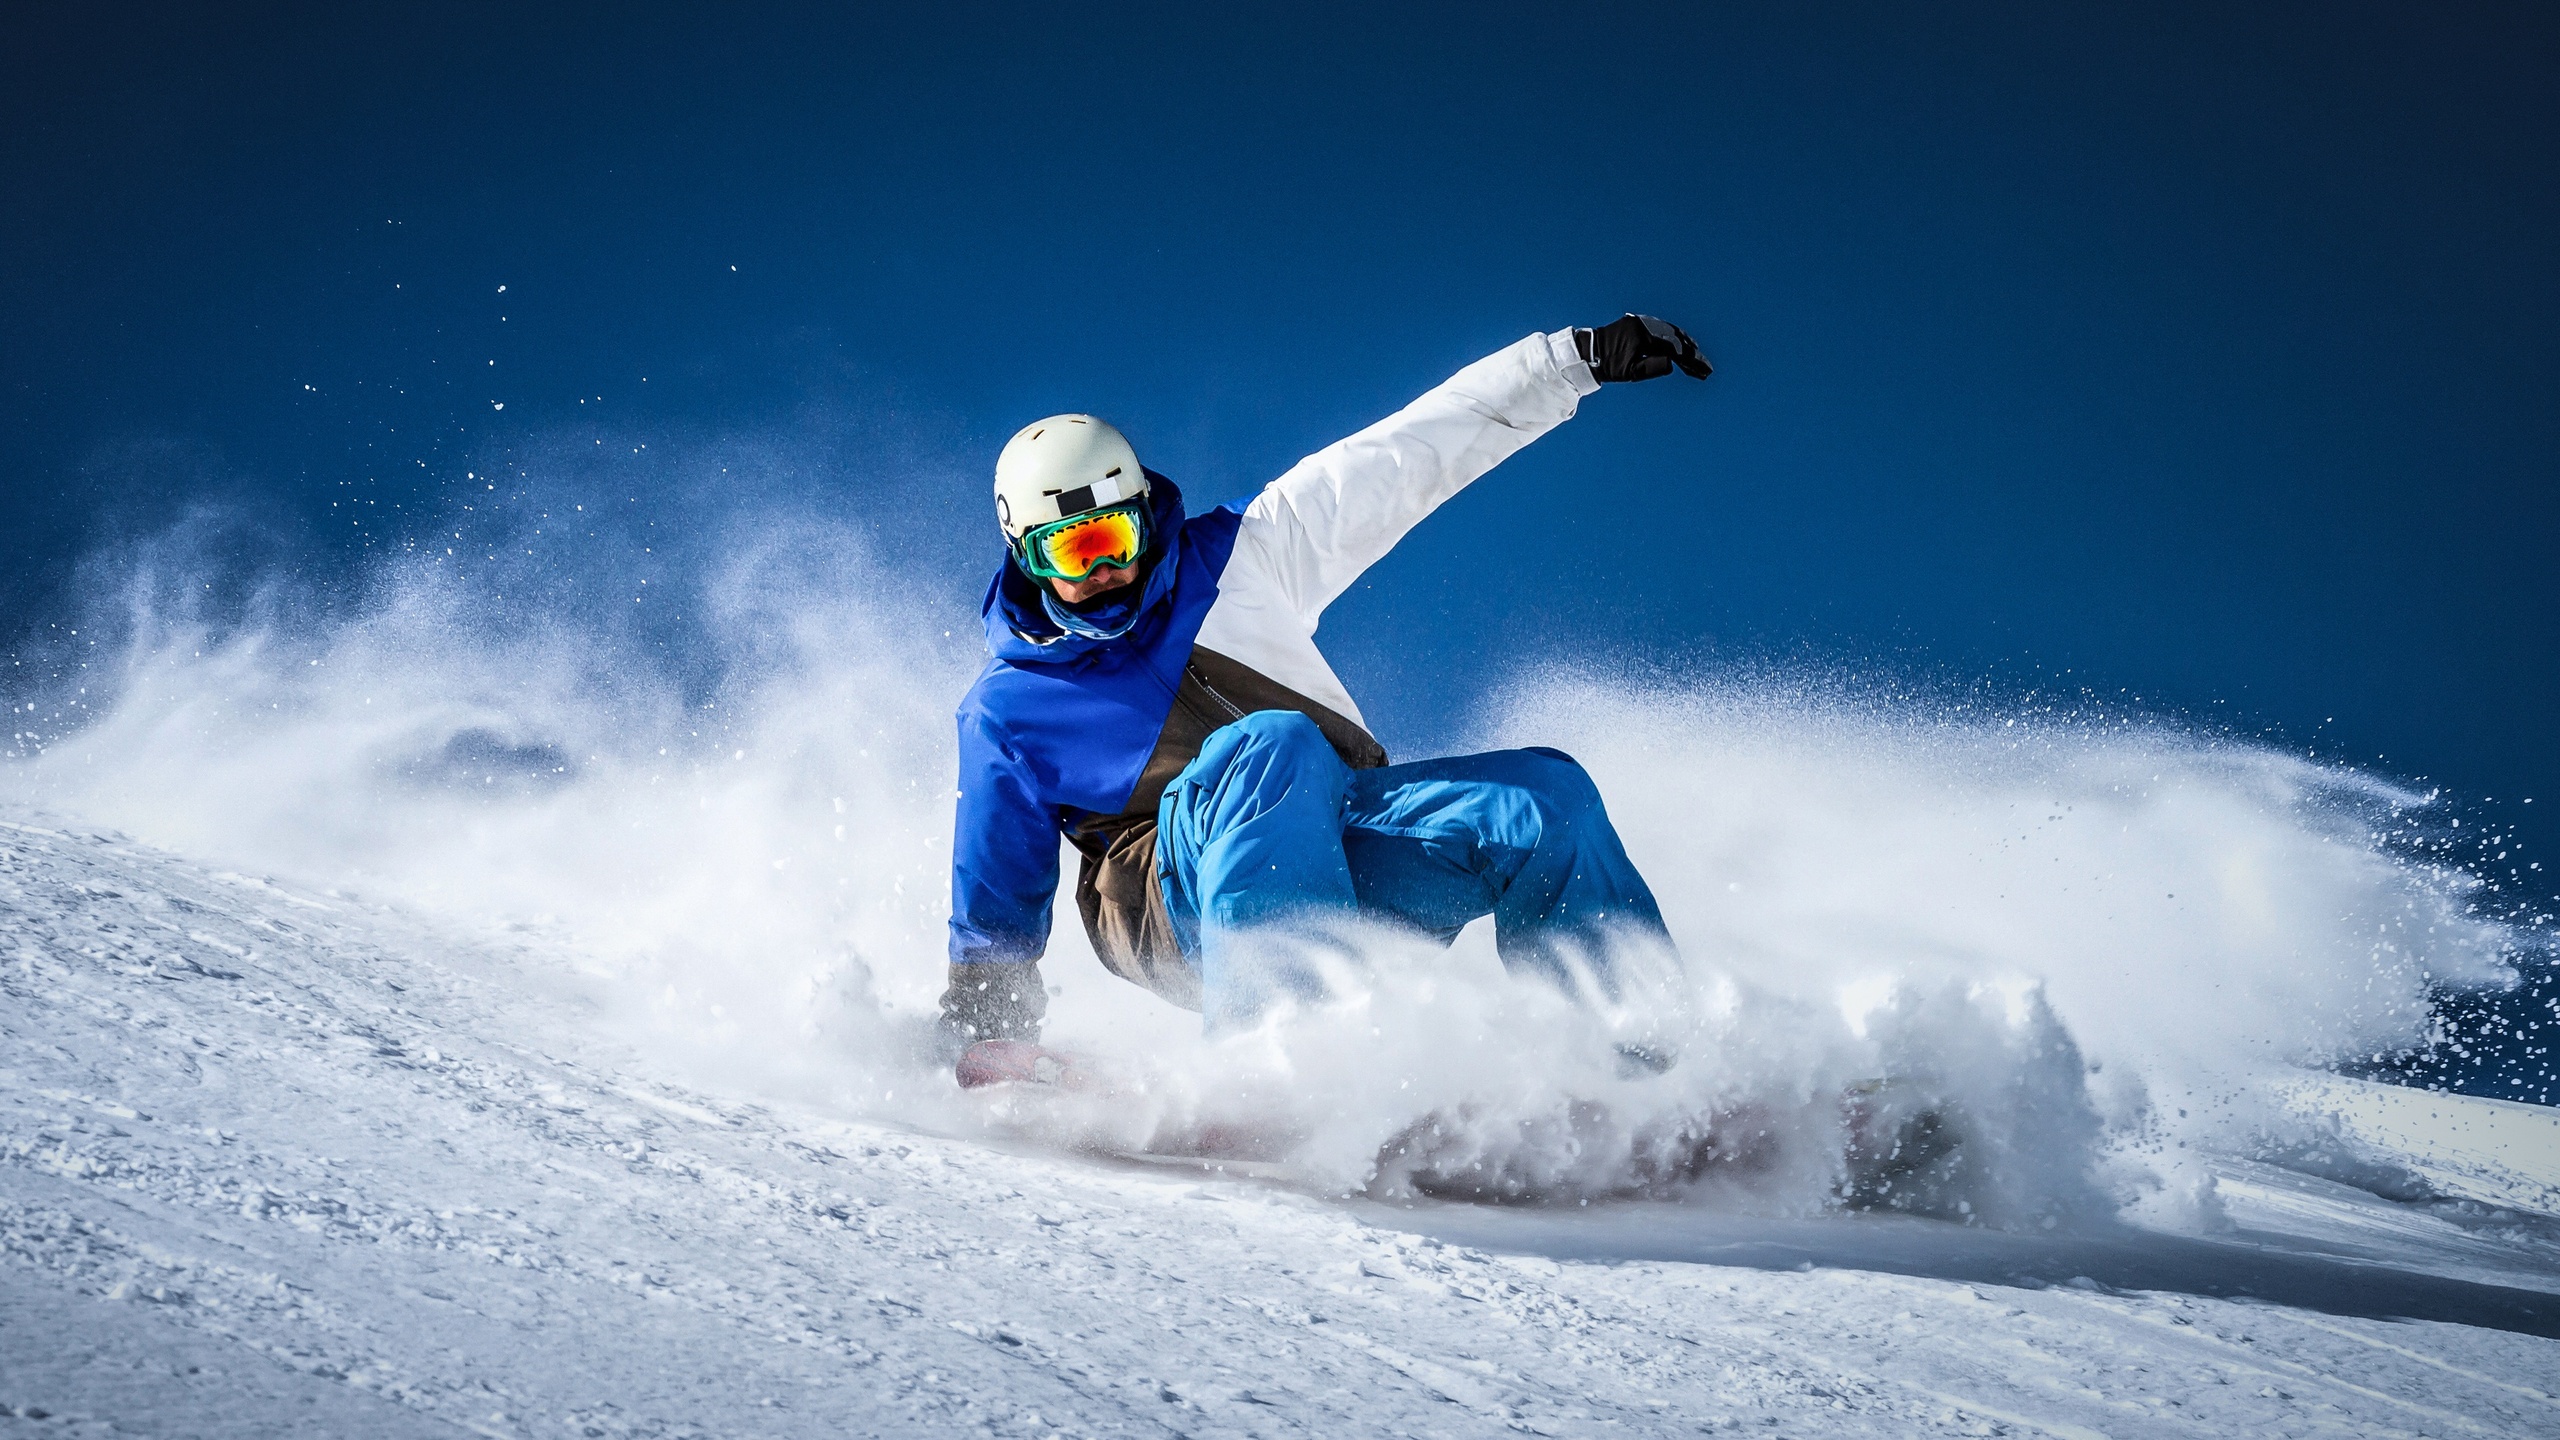 Extreme Snowboarding Wallpapers 62 images